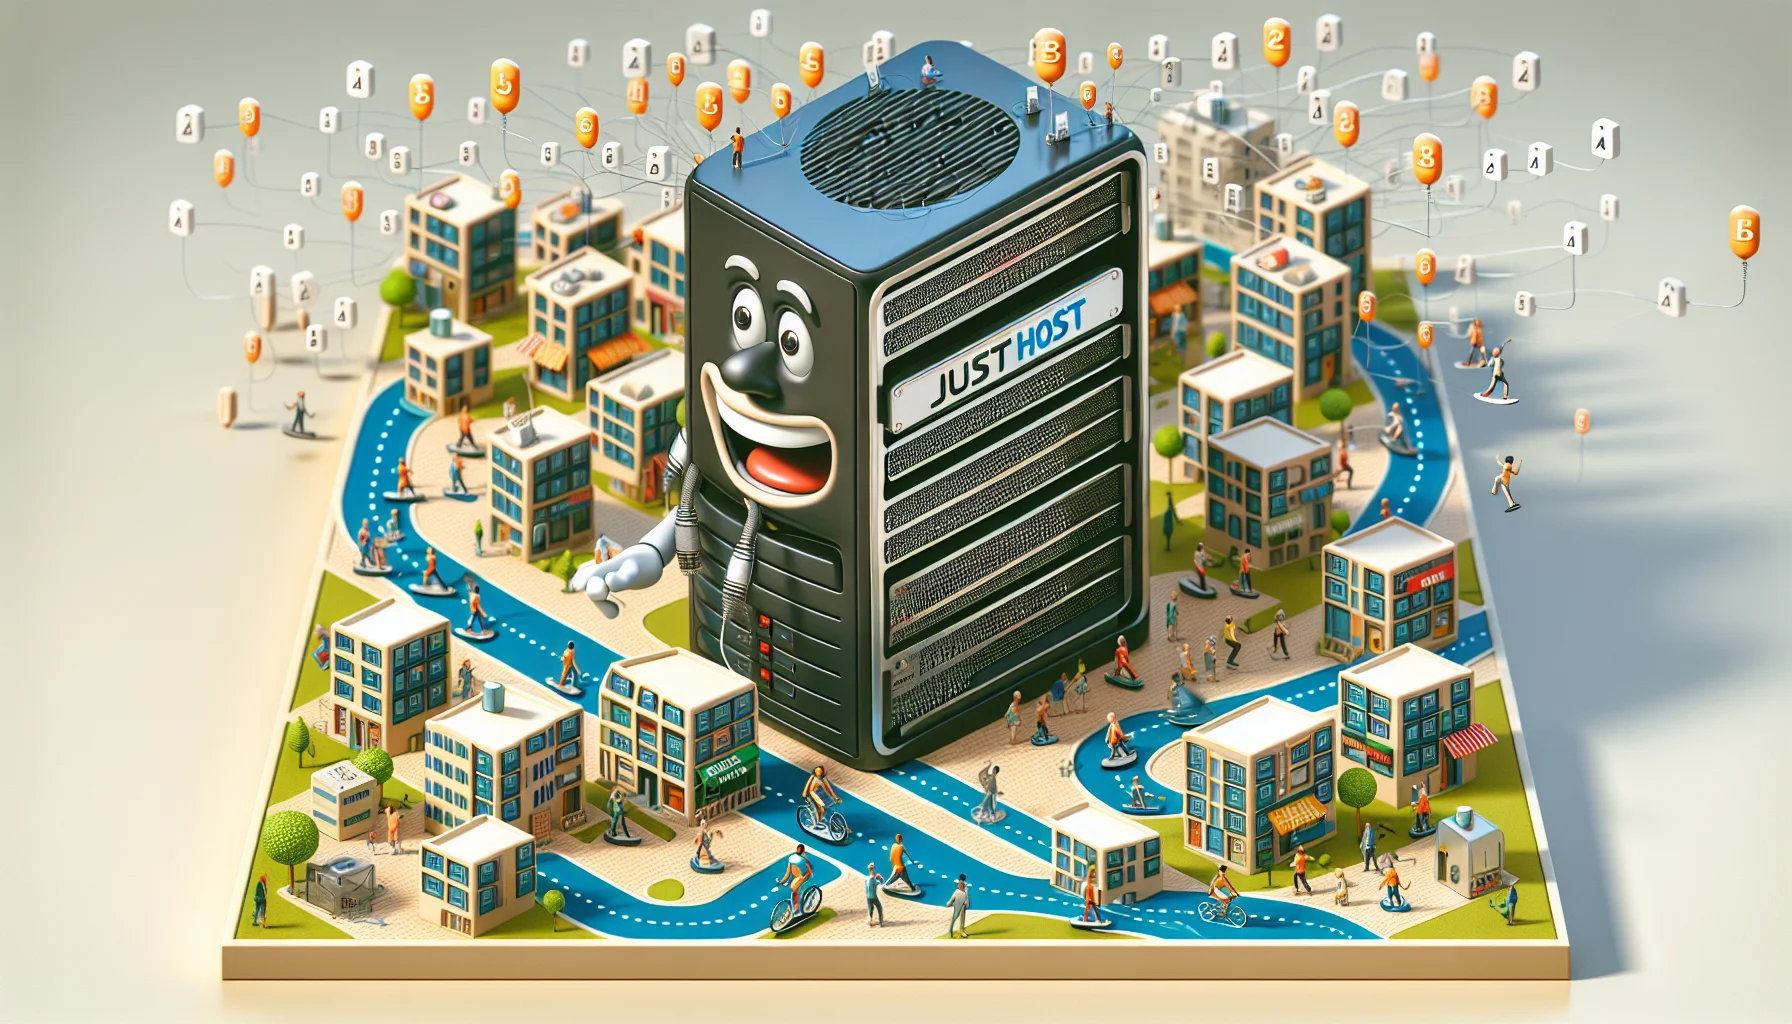 Create a humorous, enticing illustration of a web hosting scenario. An anthropomorphic computer server with a comedic expression serves as the focal point, hosting several smaller websites represented as tiny buildings. The server wears a sign that reads 'JustHost.' Various elements like small, bouncing bytes, figures of visitors represented as mini surfers riding on data streams, and connectivity signals as roads can be used to make the scene lively and interesting. All this, in an environment resembling a lively digital city to emphasize the concept of web hosting.